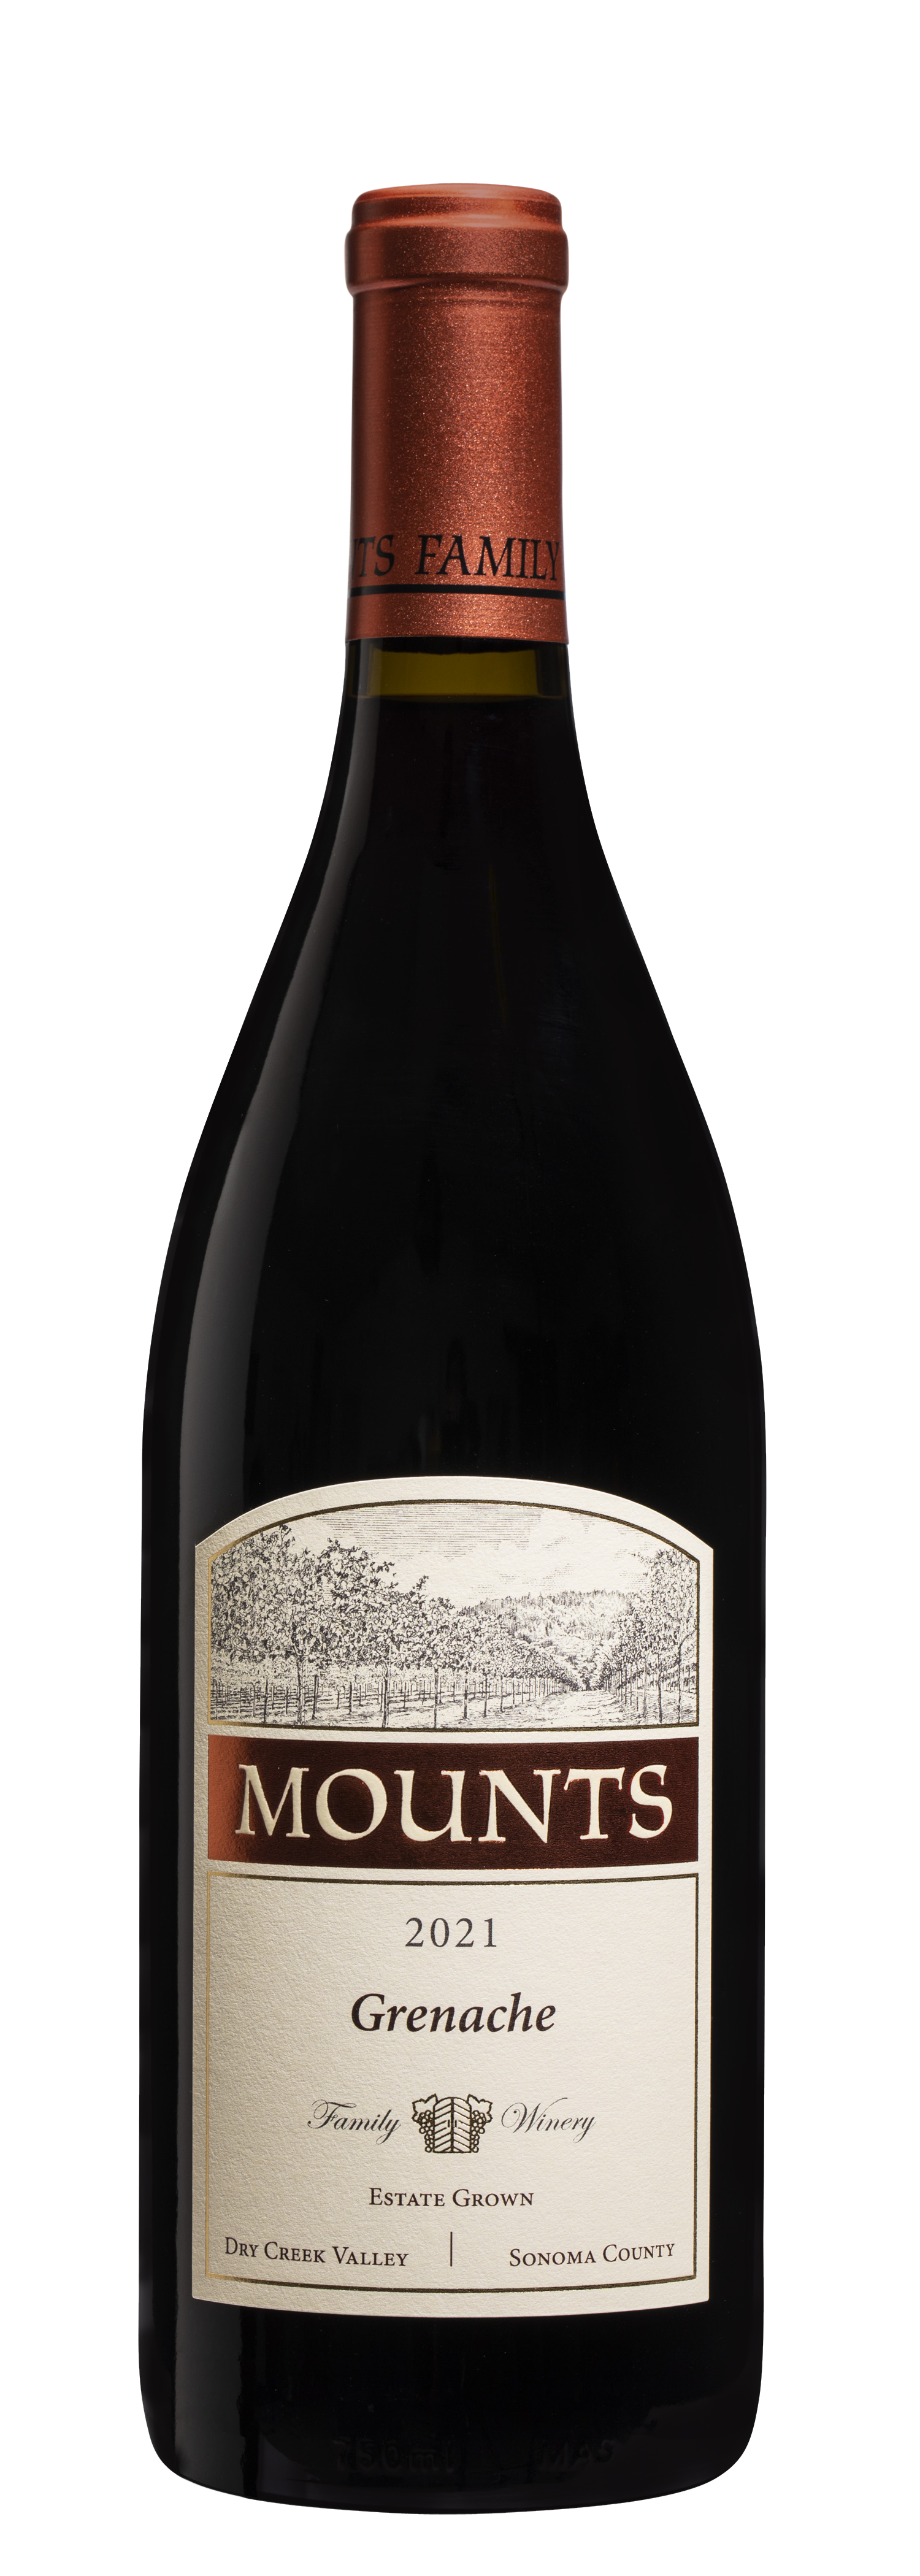 Product Image for 2021 Mounts Grenache Estate Grown